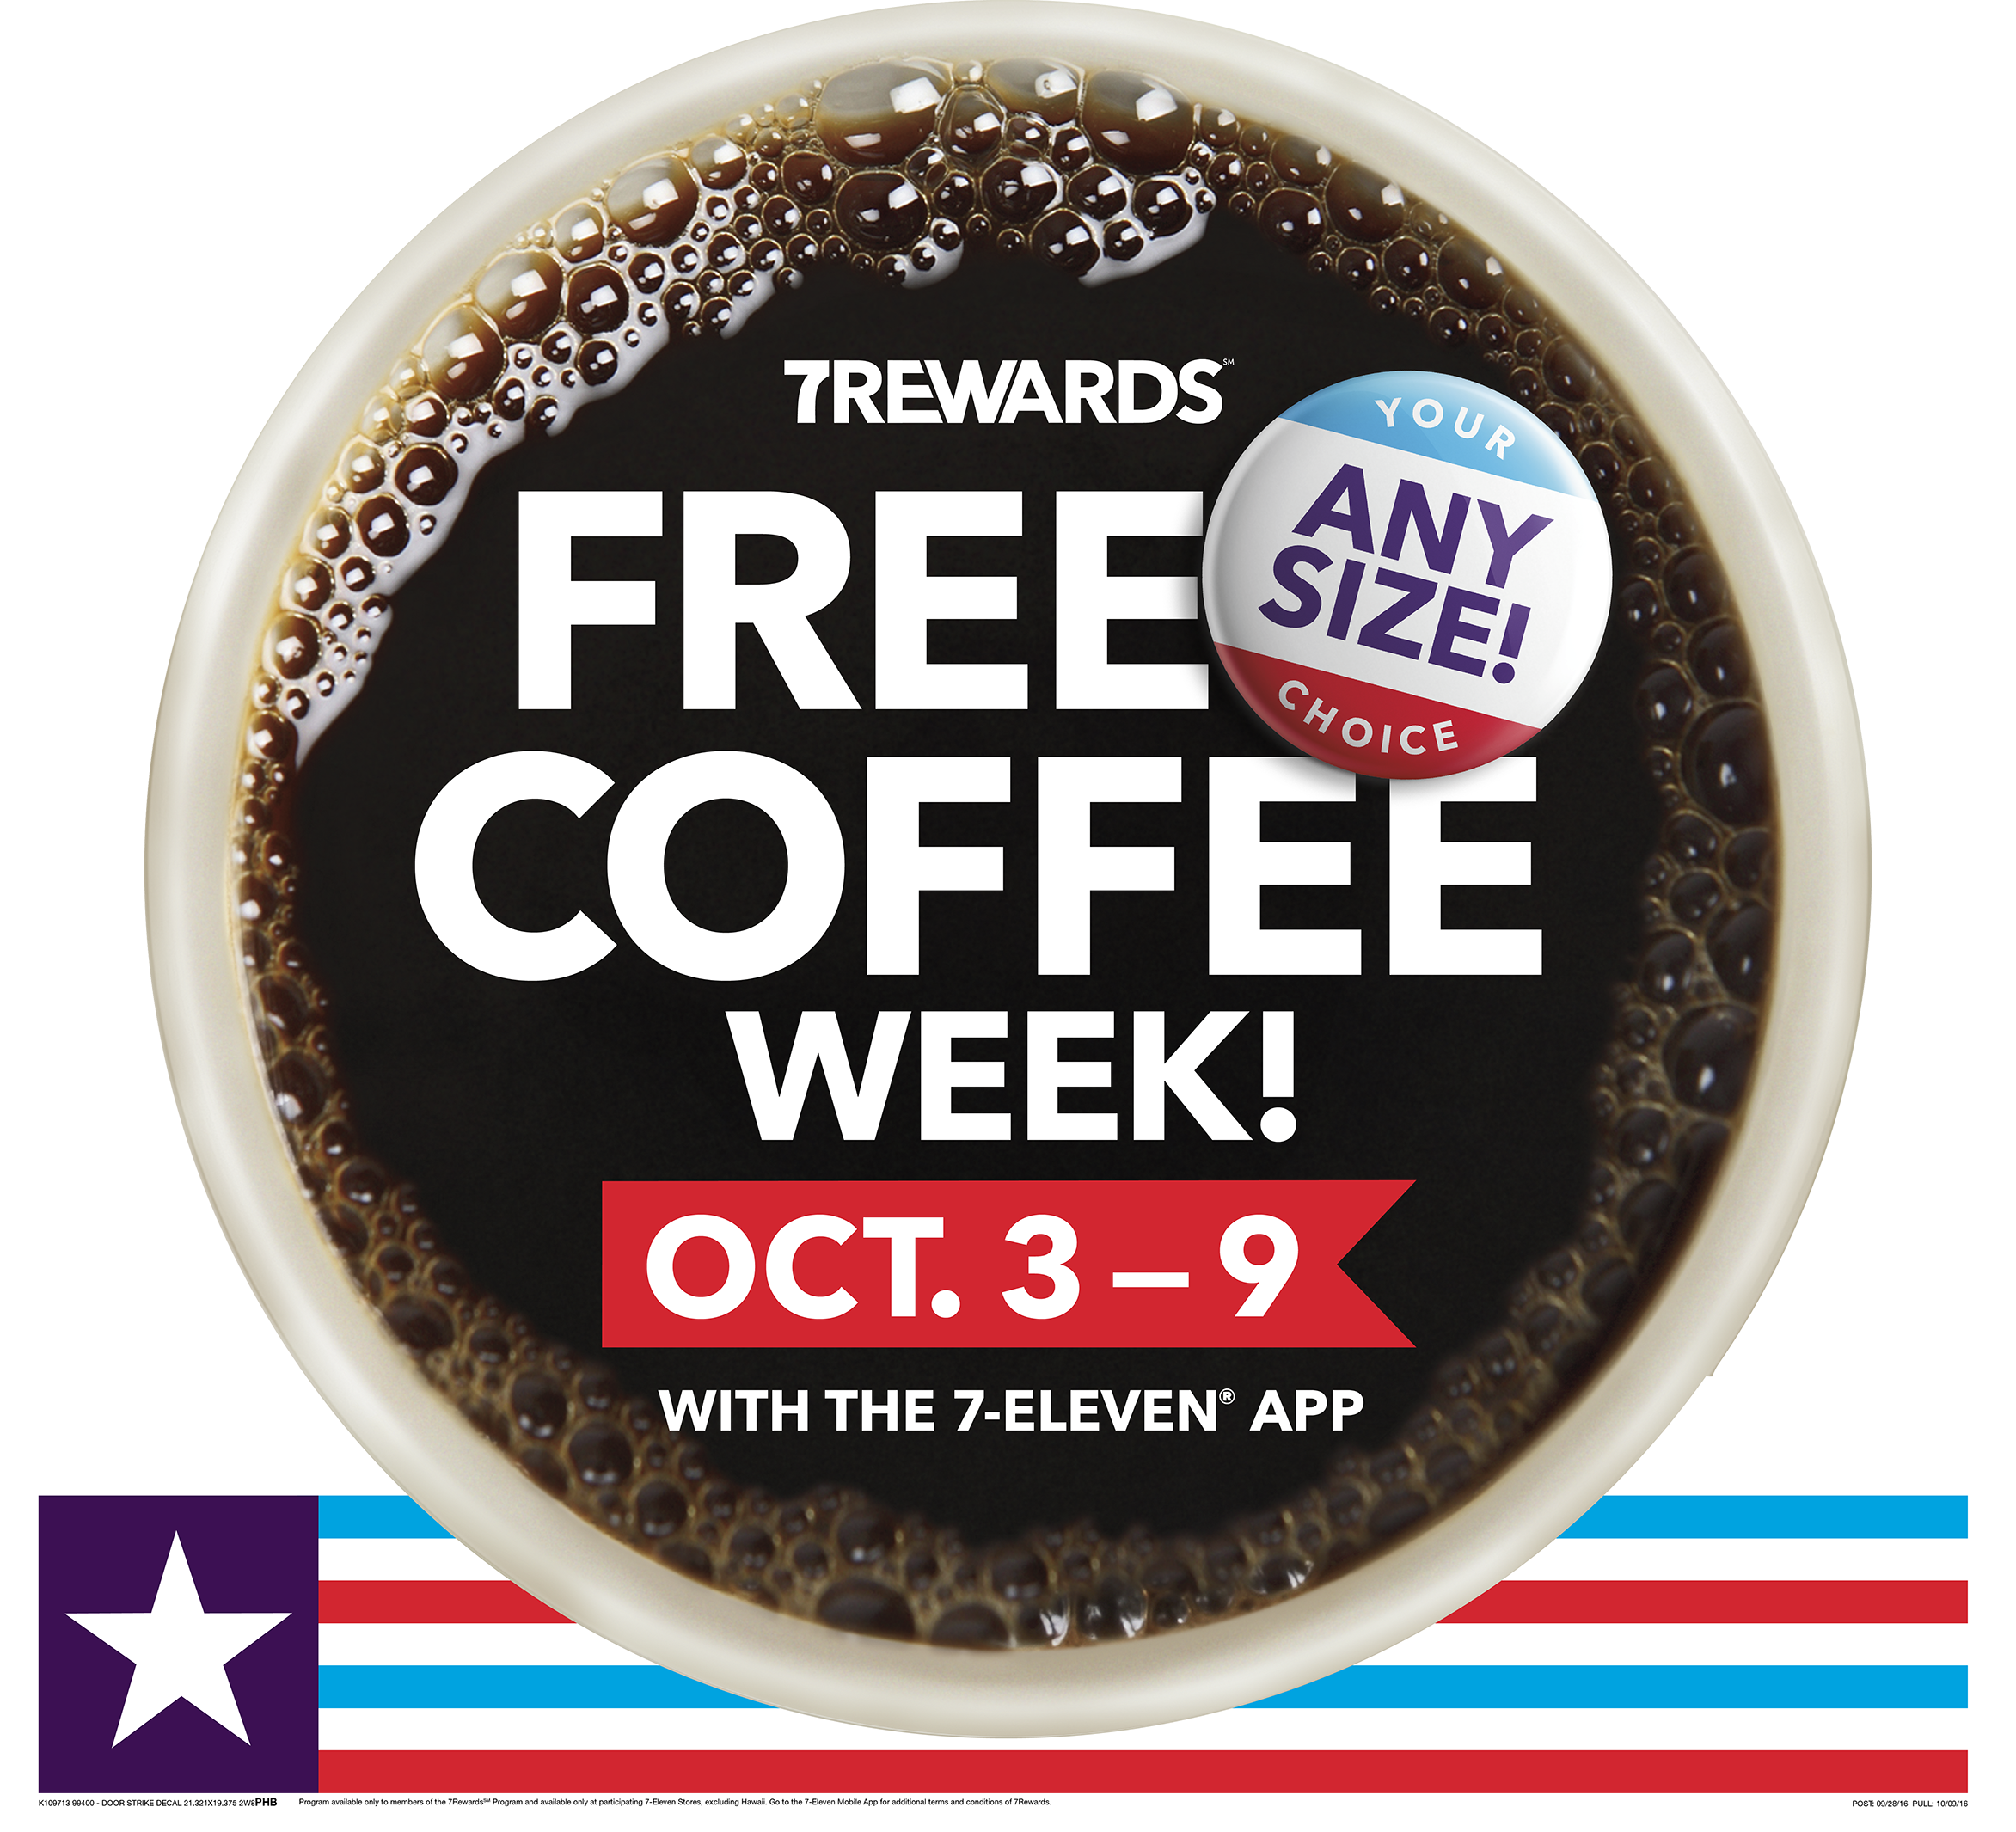 Free Cup Of Coffee Every Day During Free Coffee Week, - Chocolate (2345x2131)